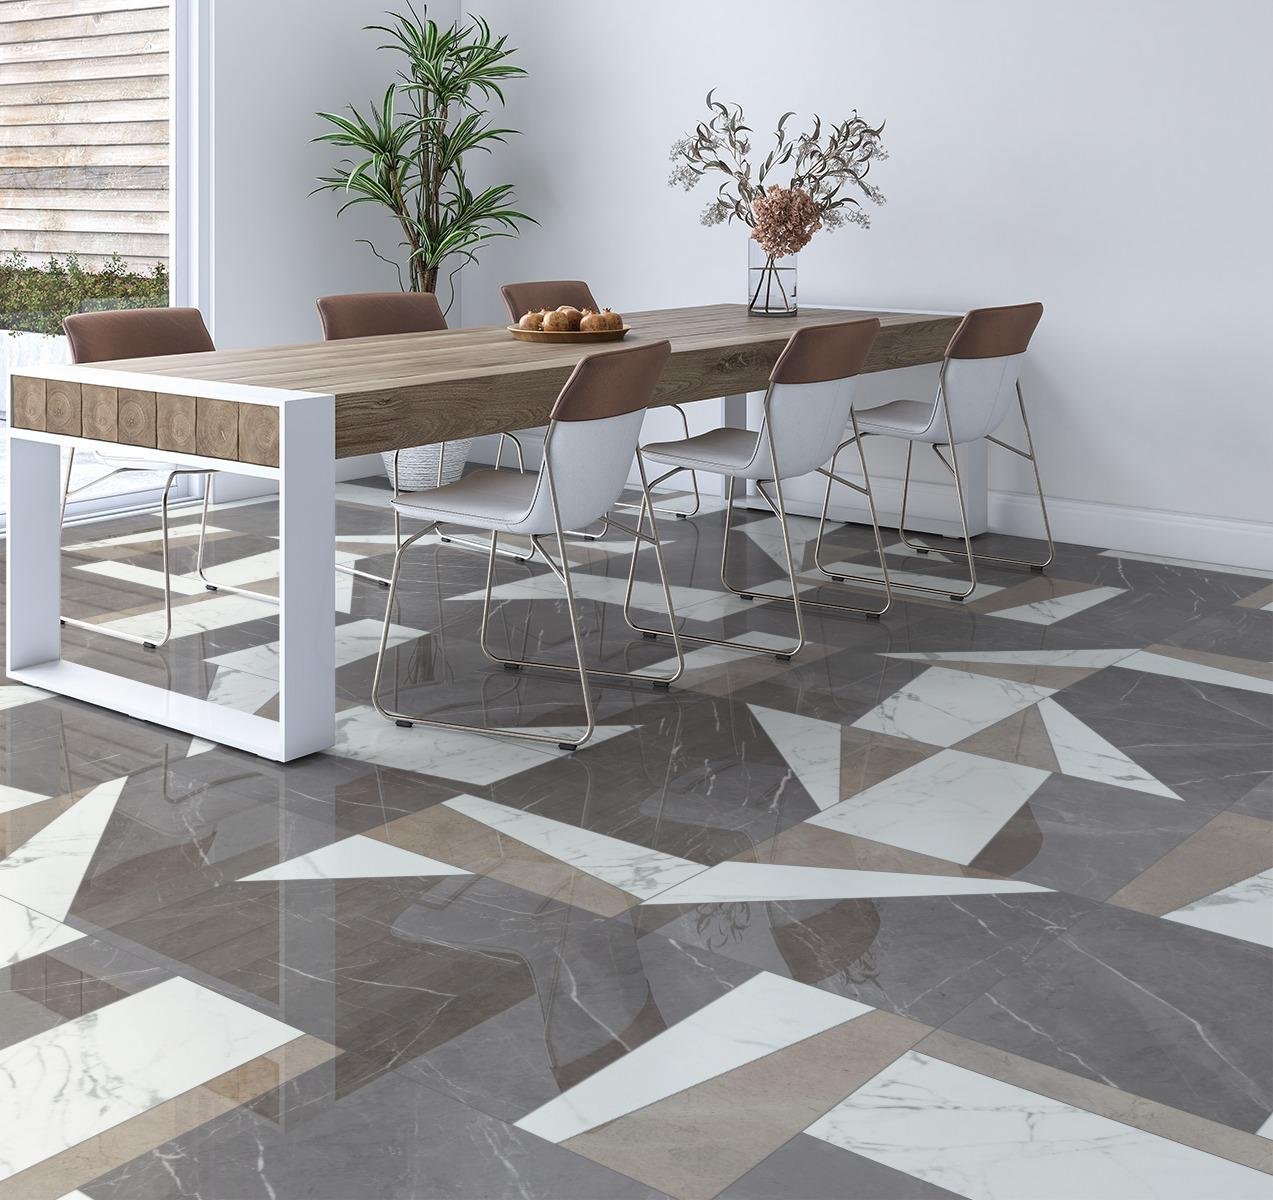 Magnetic, Pattern A, Grande Scale, Impero Polished, Calacatta Matte, Arcadia Polished